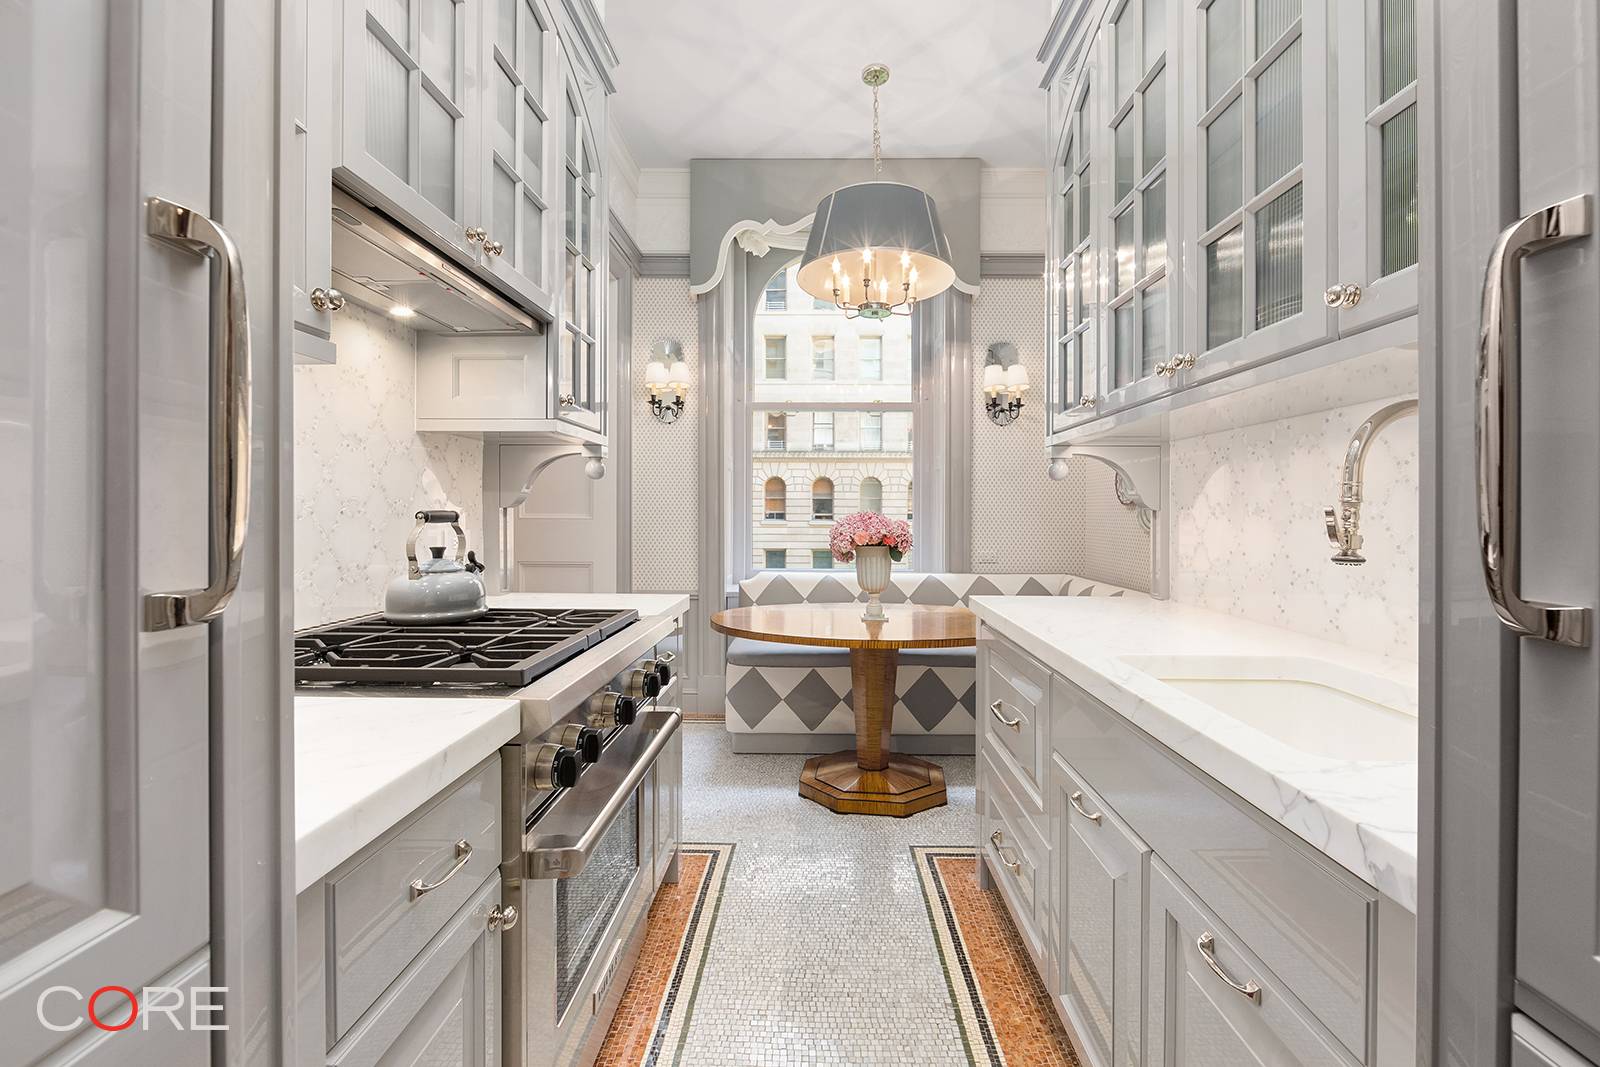 Residence 3KS at the renowned Apthorp Condominium is a meticulously renovated two bedroom home that integrates the finest contemporary finishes with the original details distinctive to the building.